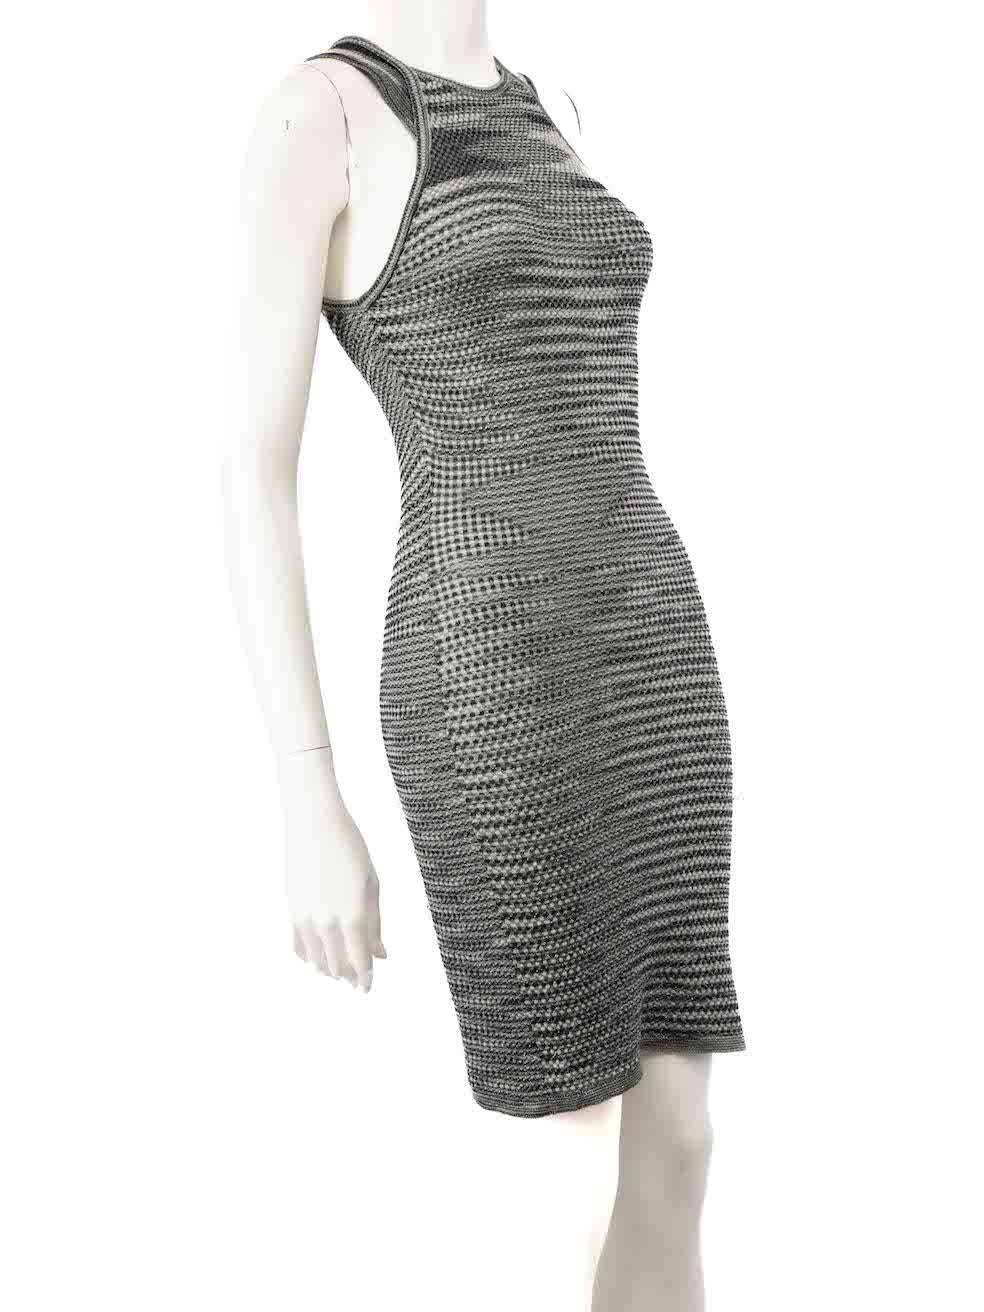 CONDITION is Very good. Minimal wear to dress is evident. Minimal pull thread around the hemline and front skirt area on this used Missoni designer resale item.
 
 
 
 Details
 
 
 Grey
 
 Wool
 
 Knee length dress
 
 Knitted and stretchy
 
 Striped